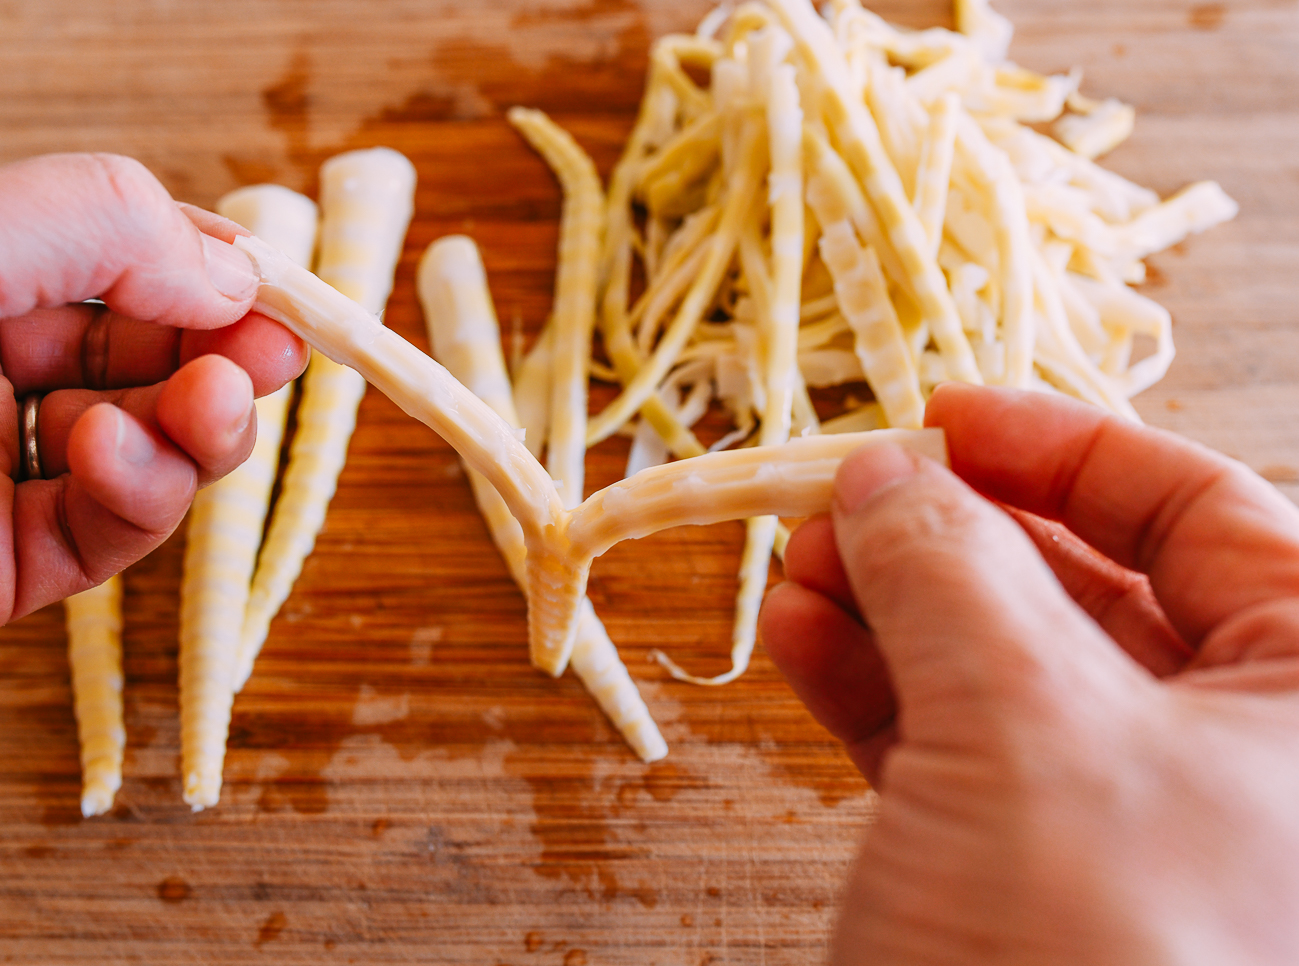 tearing bamboo shoots into pieces